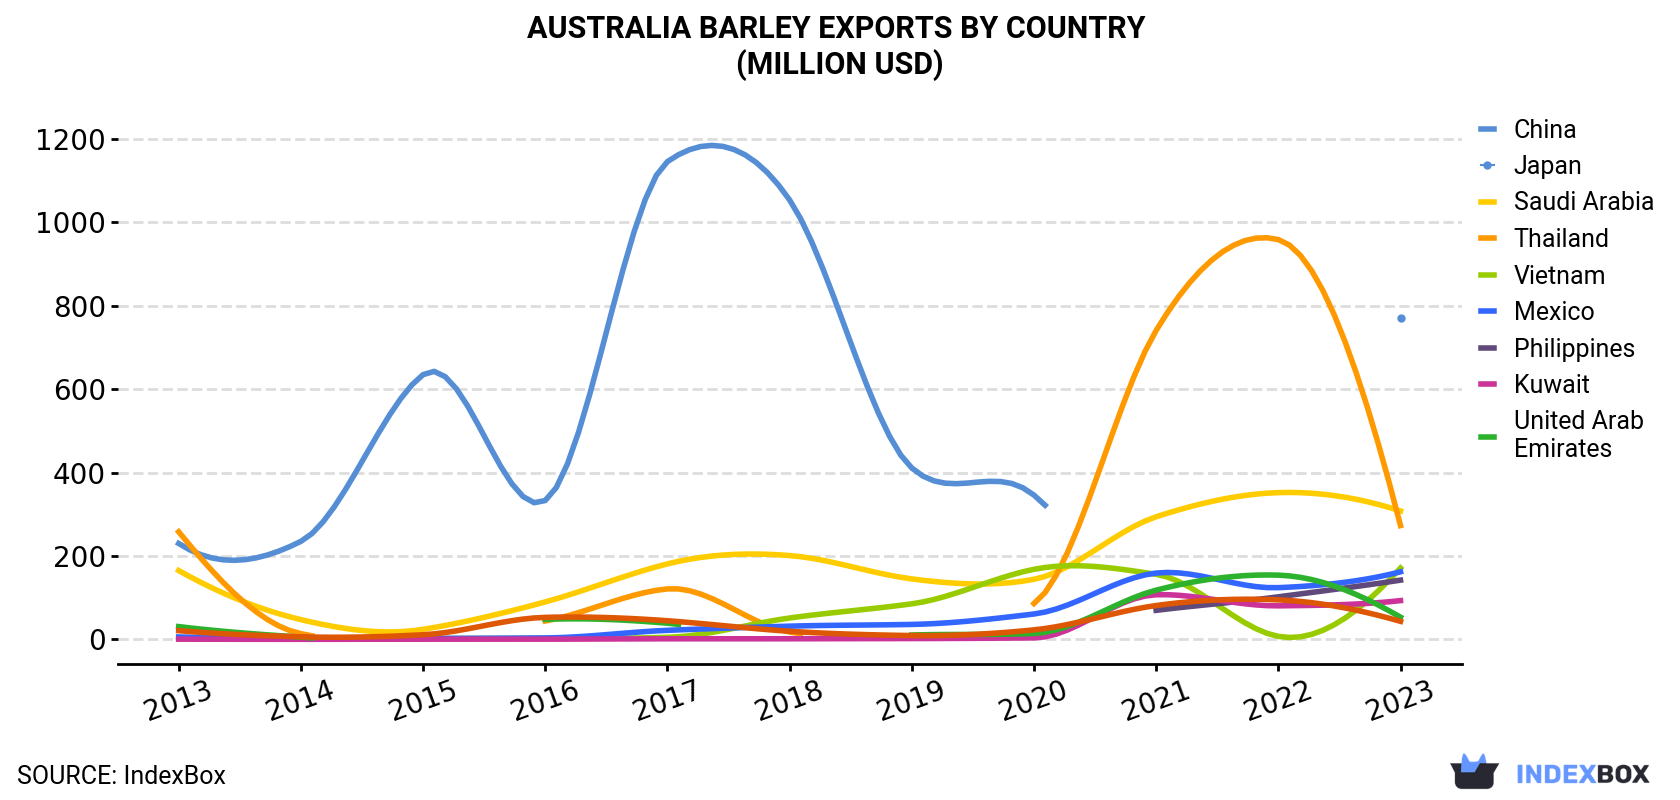 Australia Barley Exports By Country (Million USD)